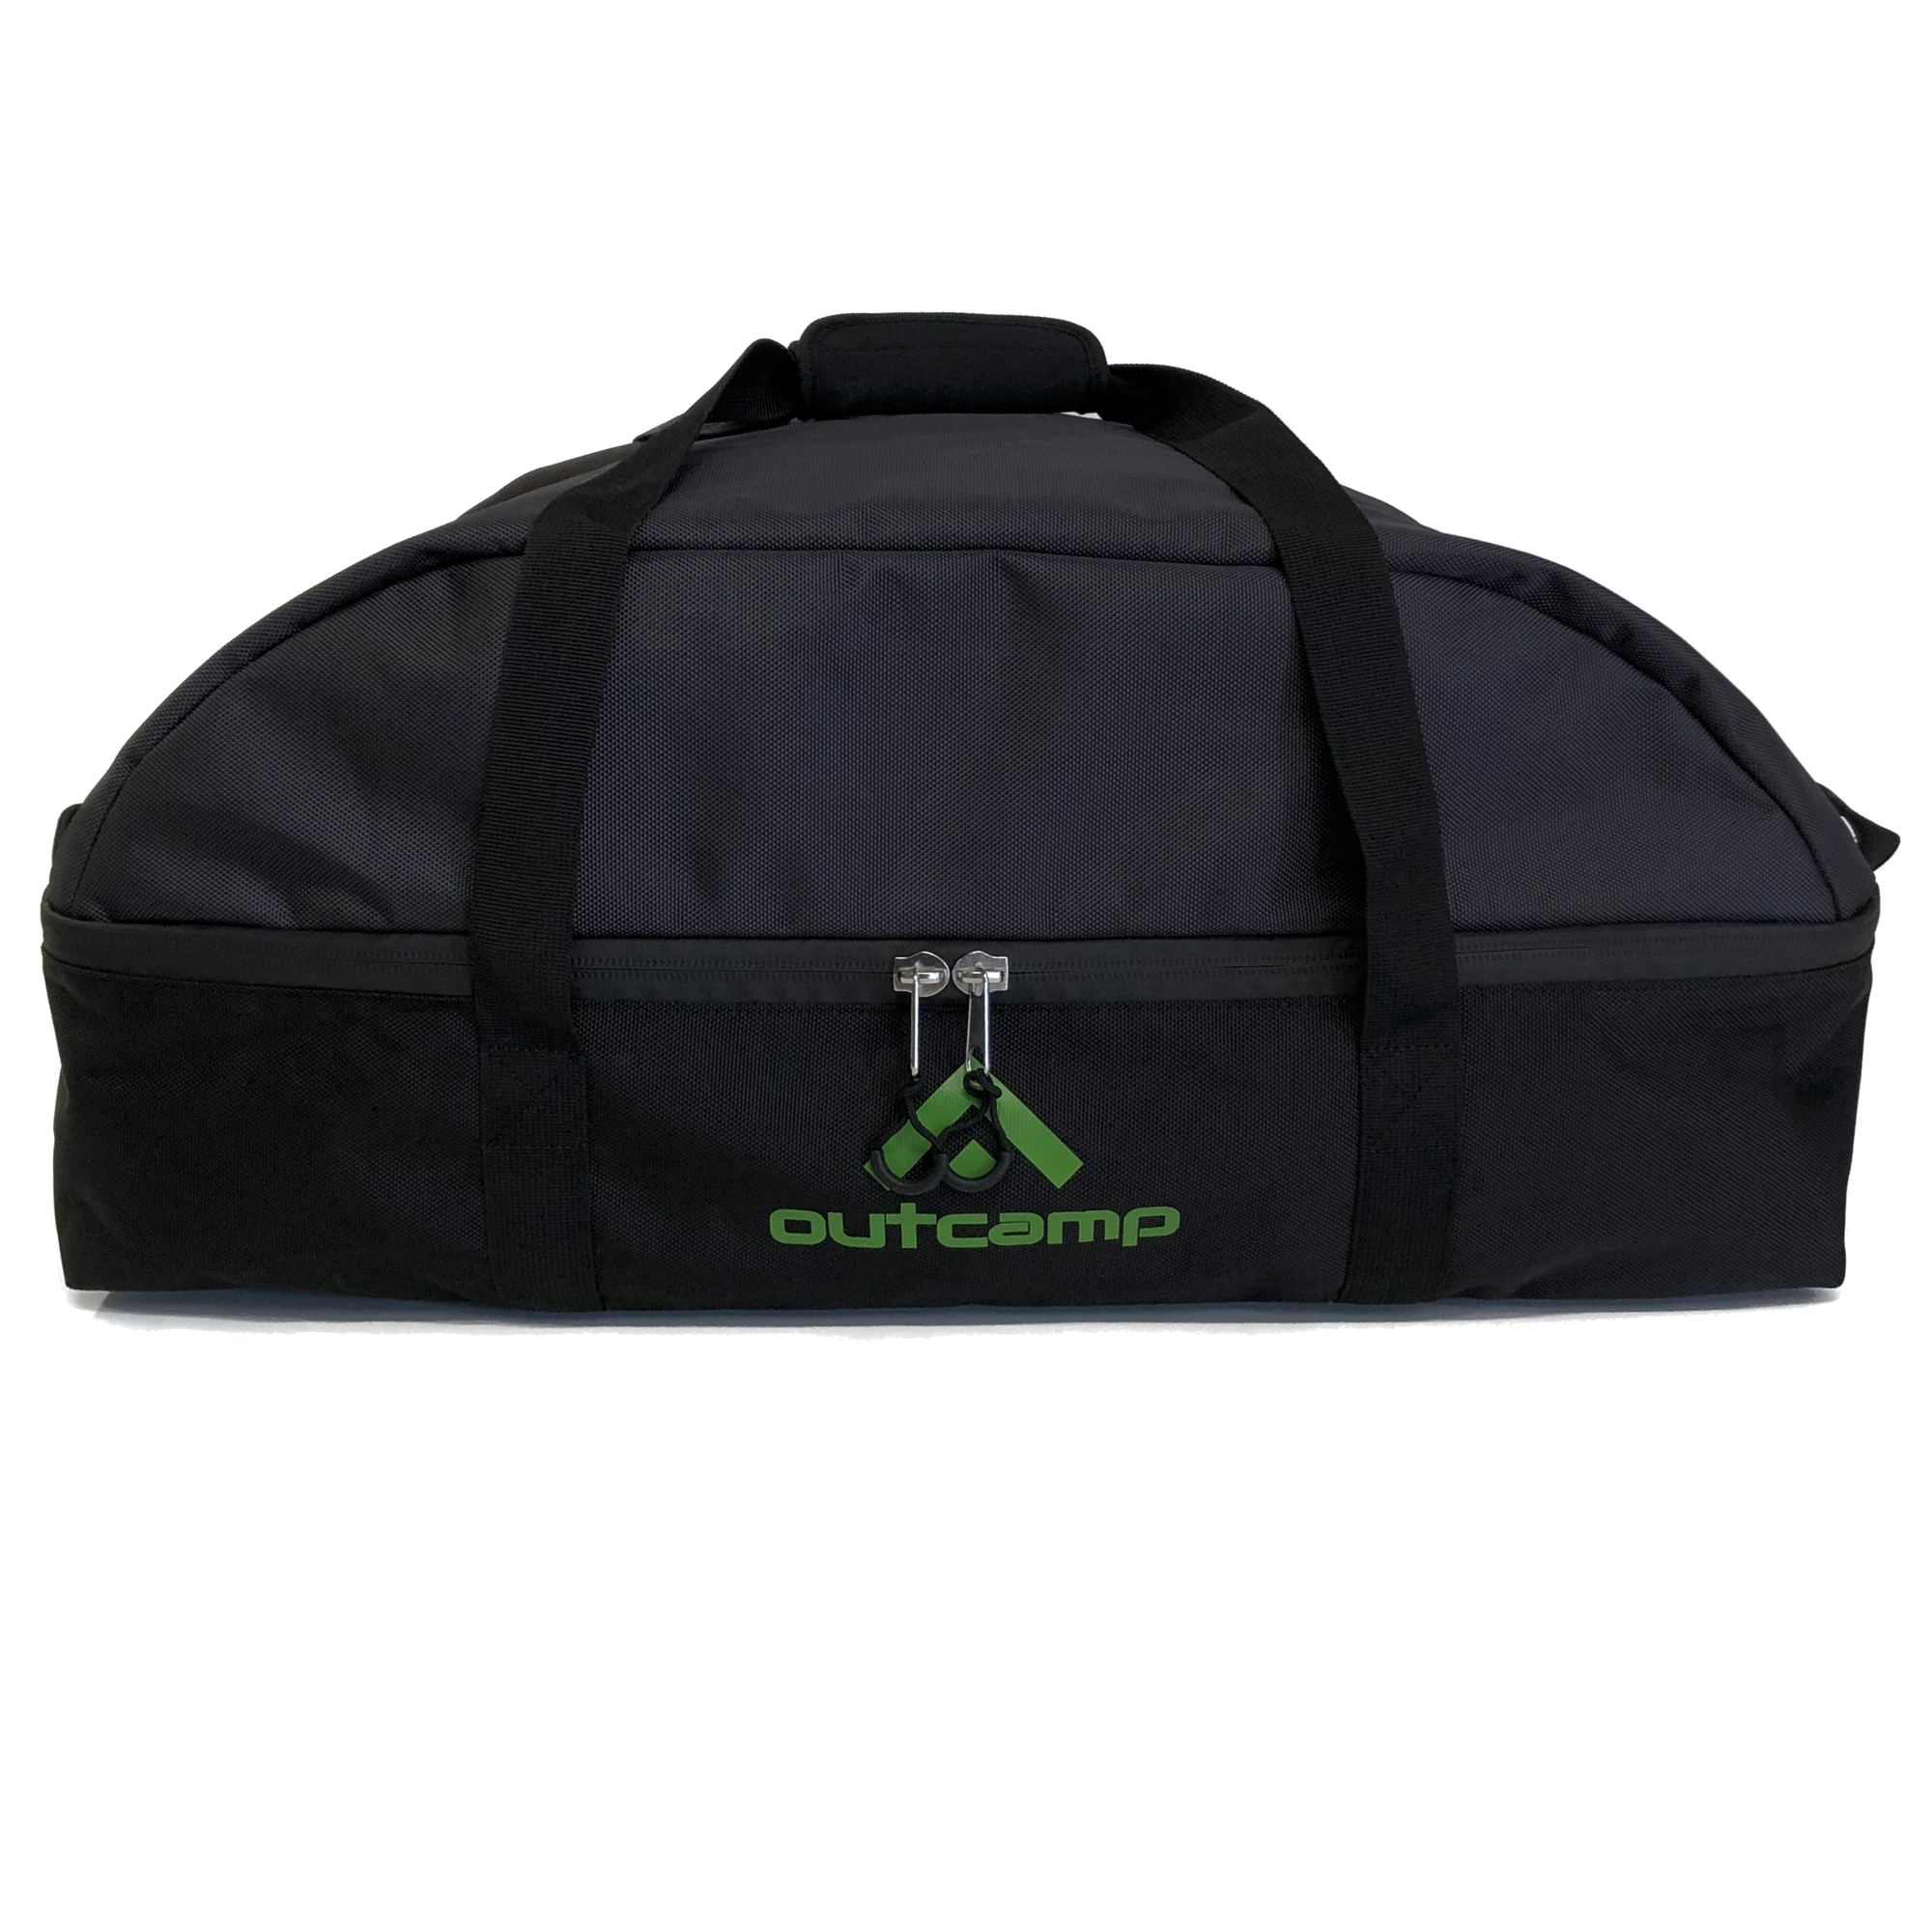 Weber Q1000 series carry bag by Outcamp